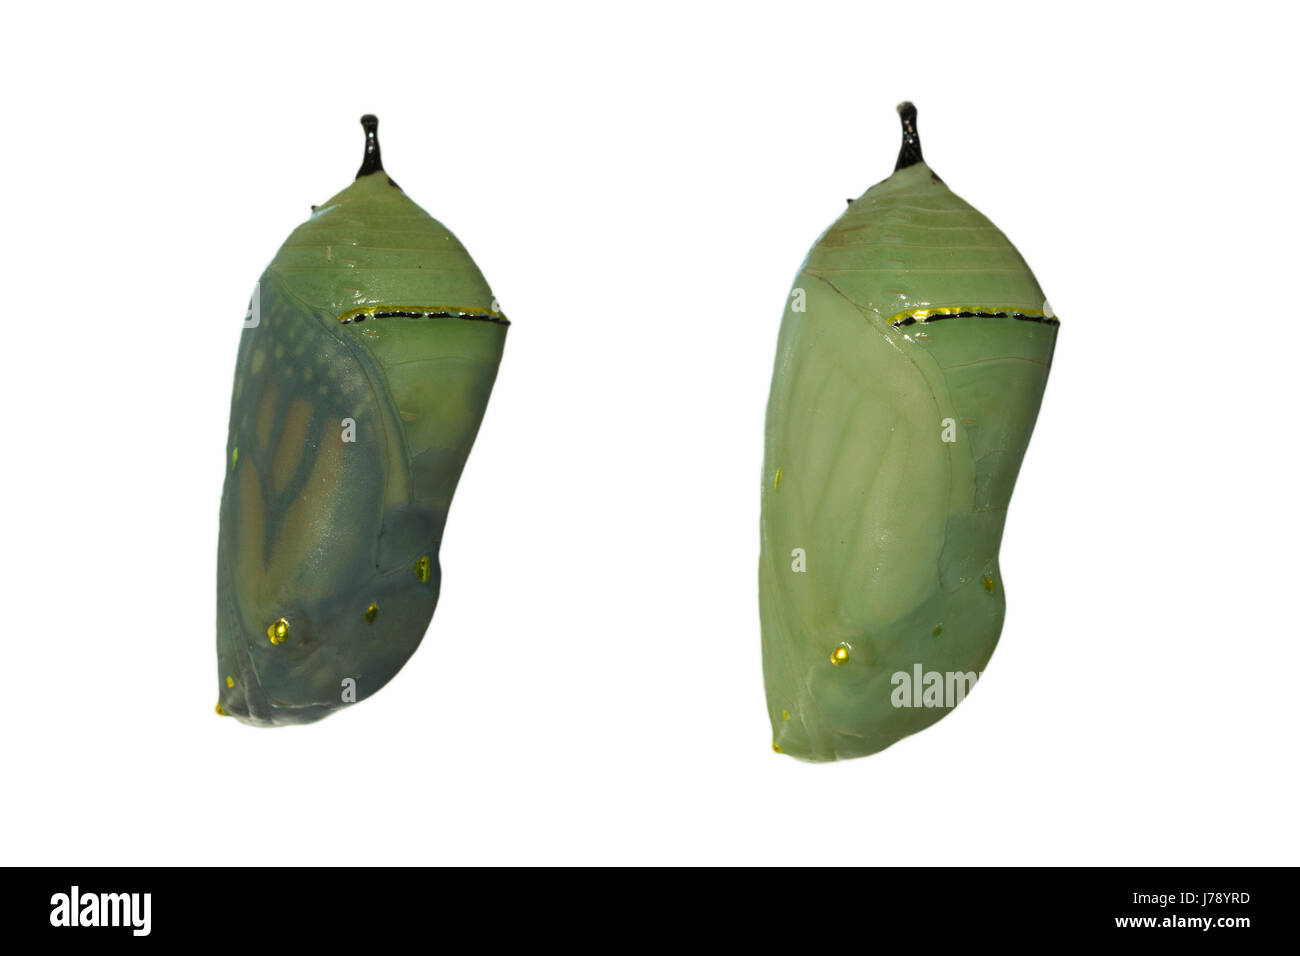 Two monarch butterfly chrysalises with one day difference in development, the left one nearly ready for eclosion as wings are showing through the shel Stock Photo